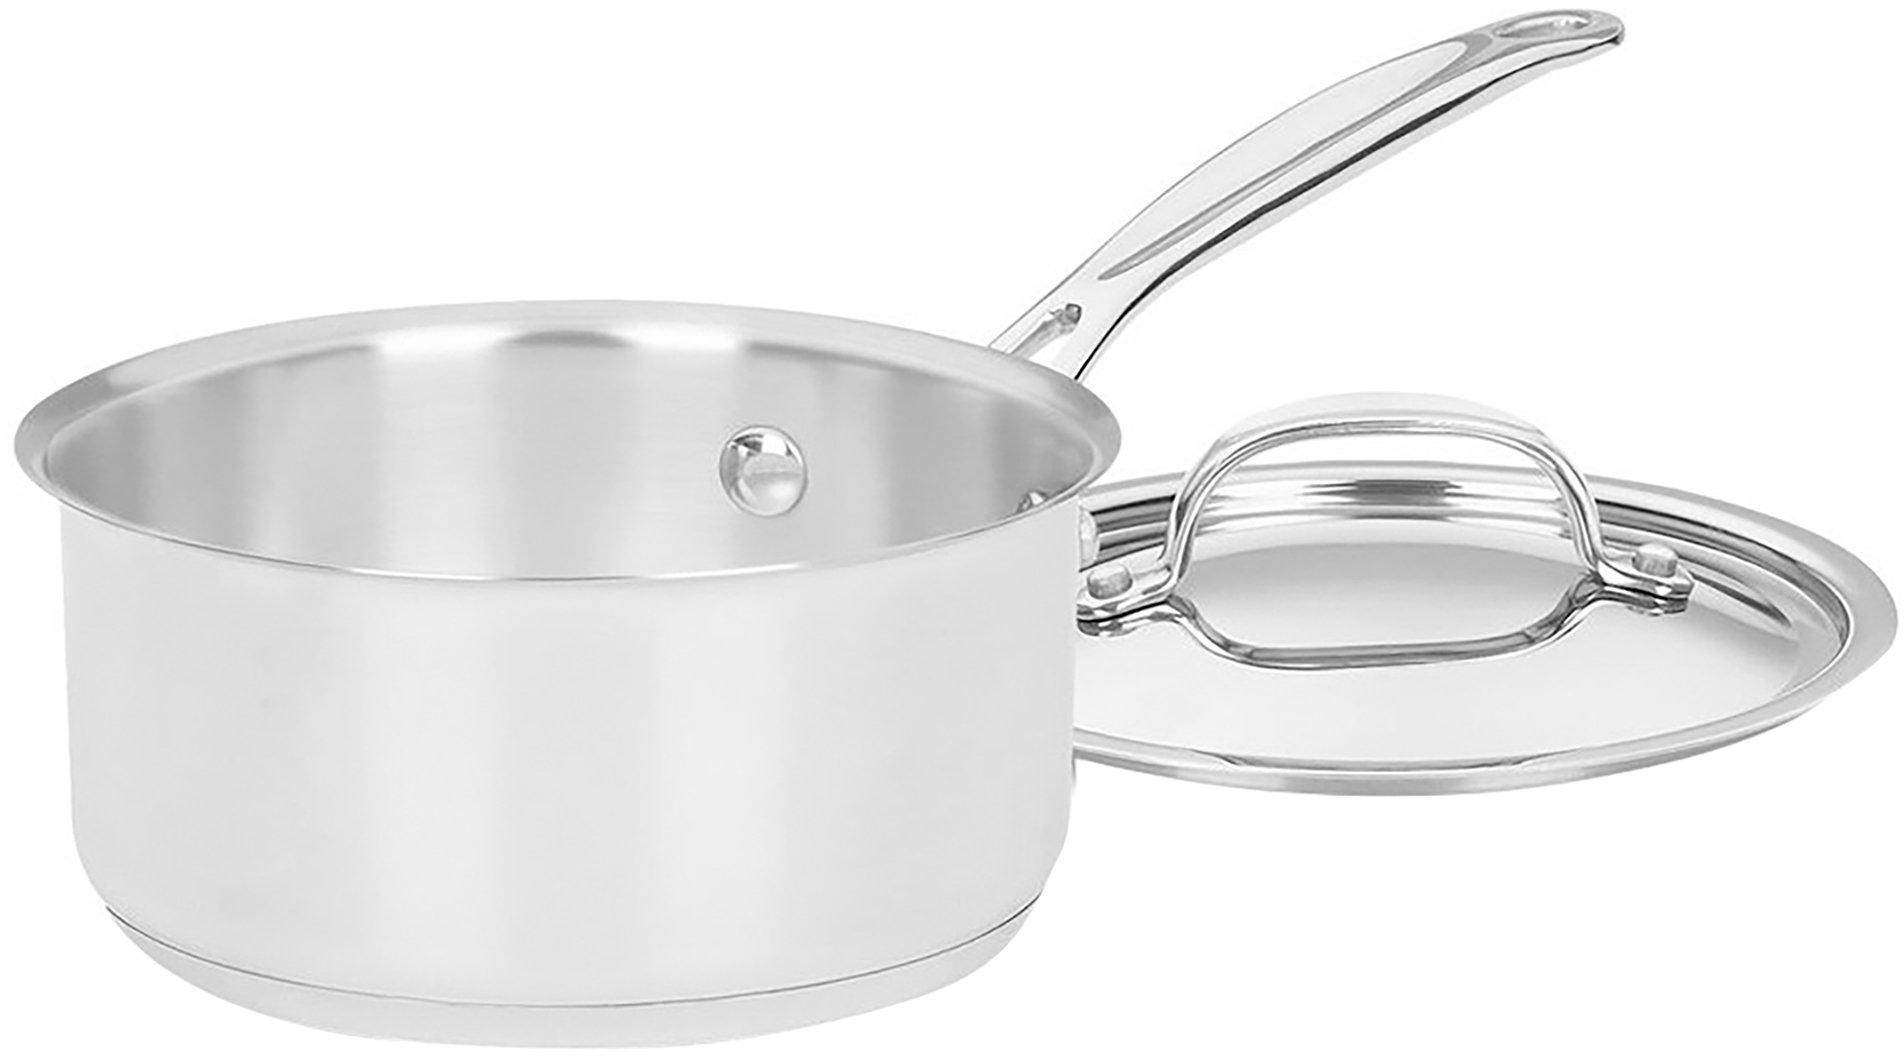 Cuisinart 1.5 Qt. Chef's Classic Sauce Pan With